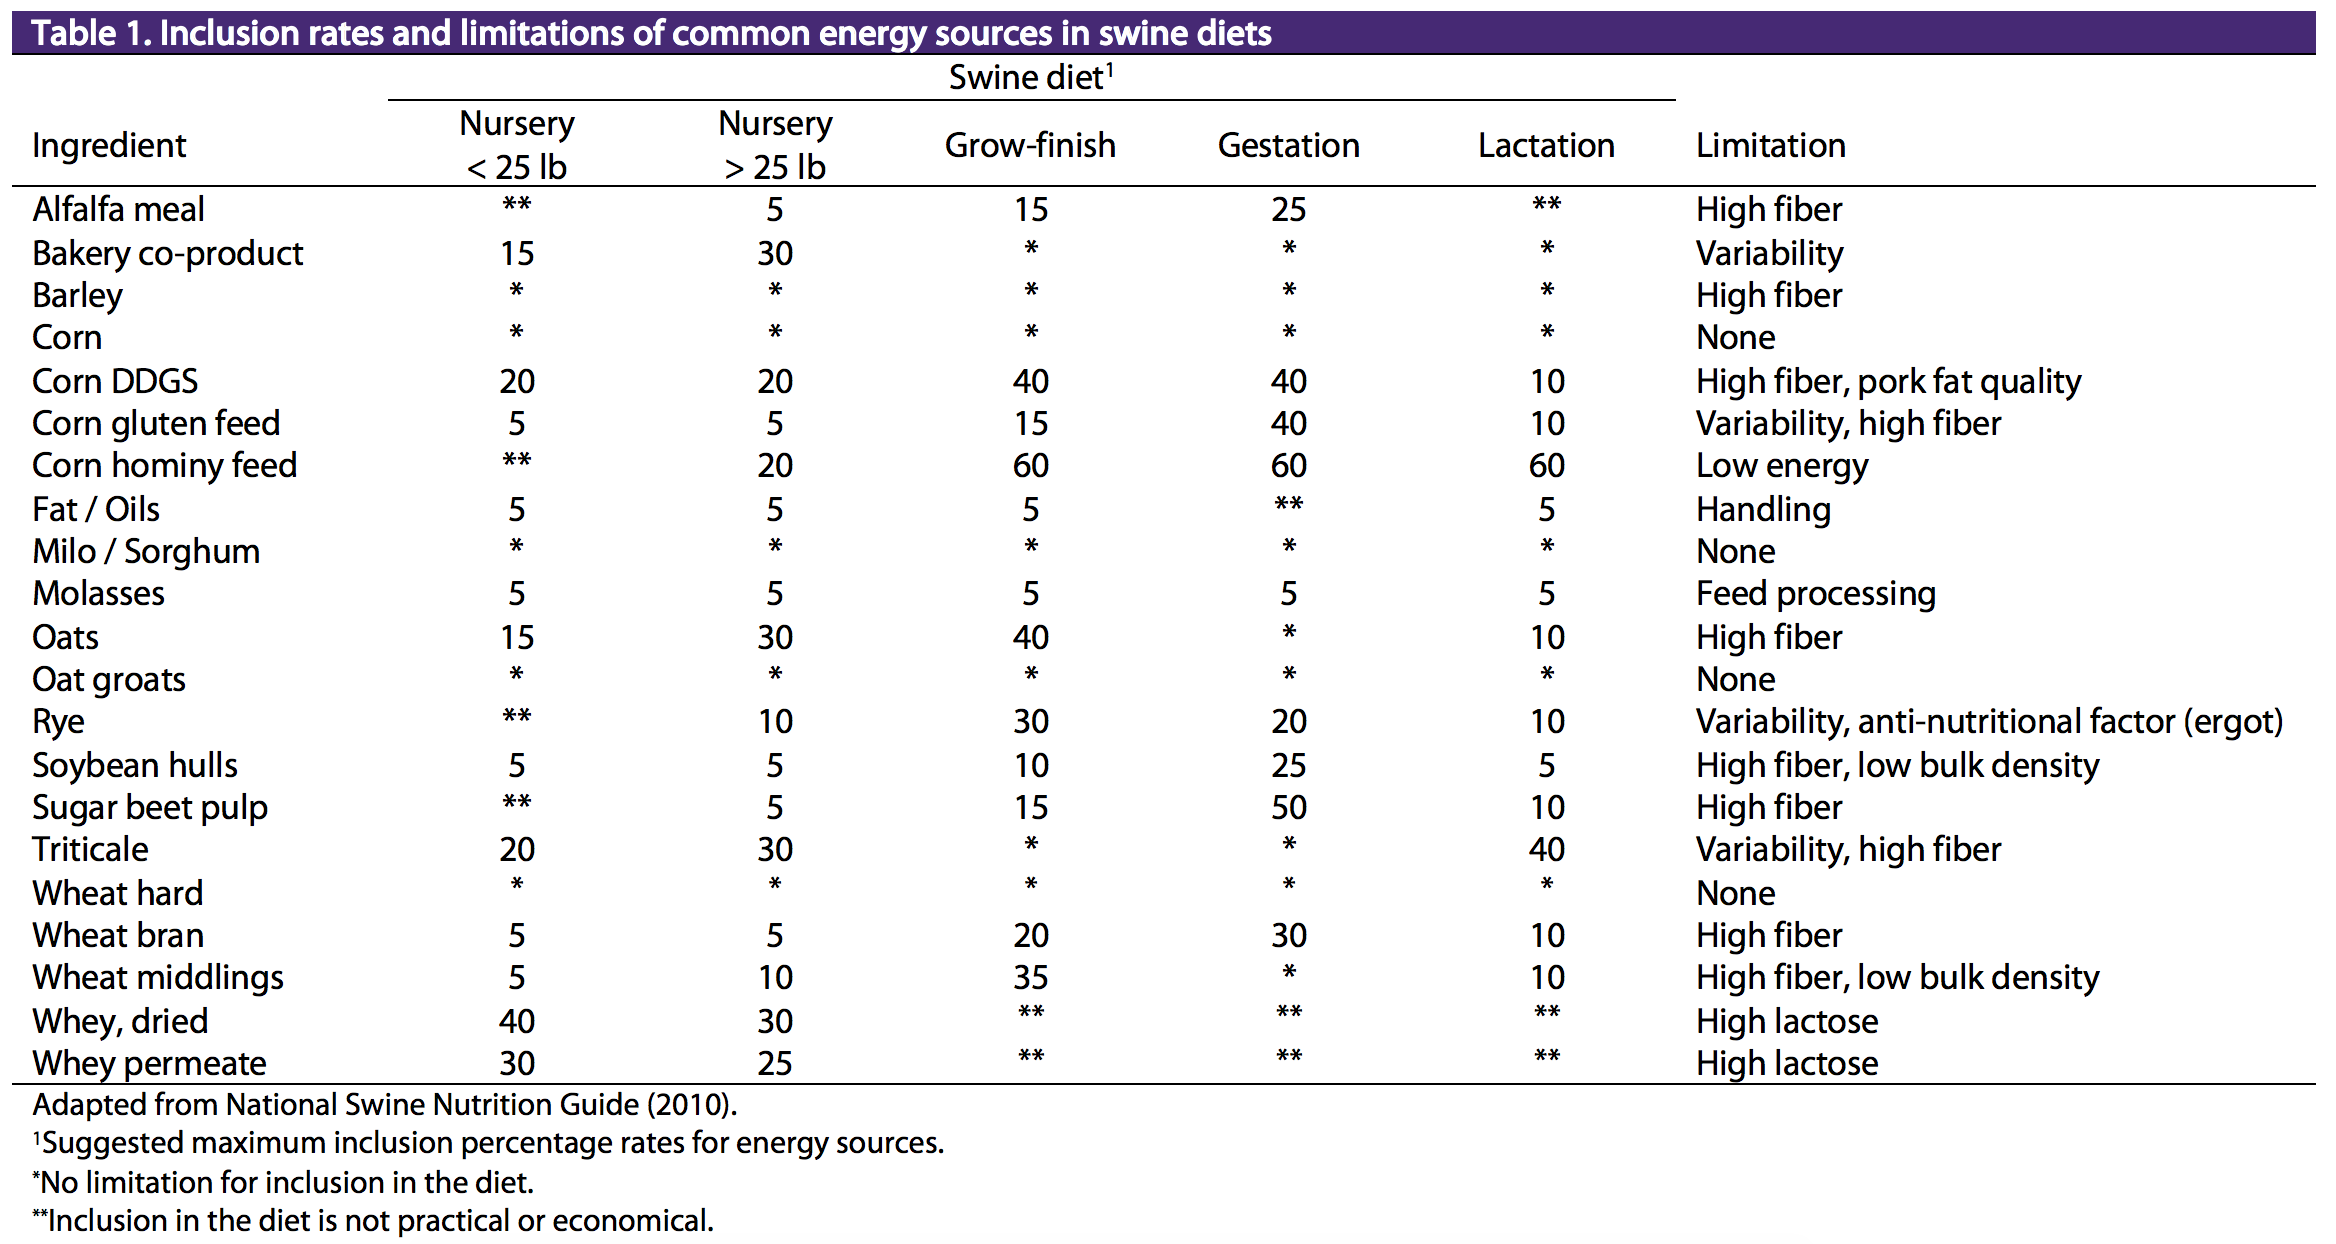 Inclusion rates and limitations of energy sources